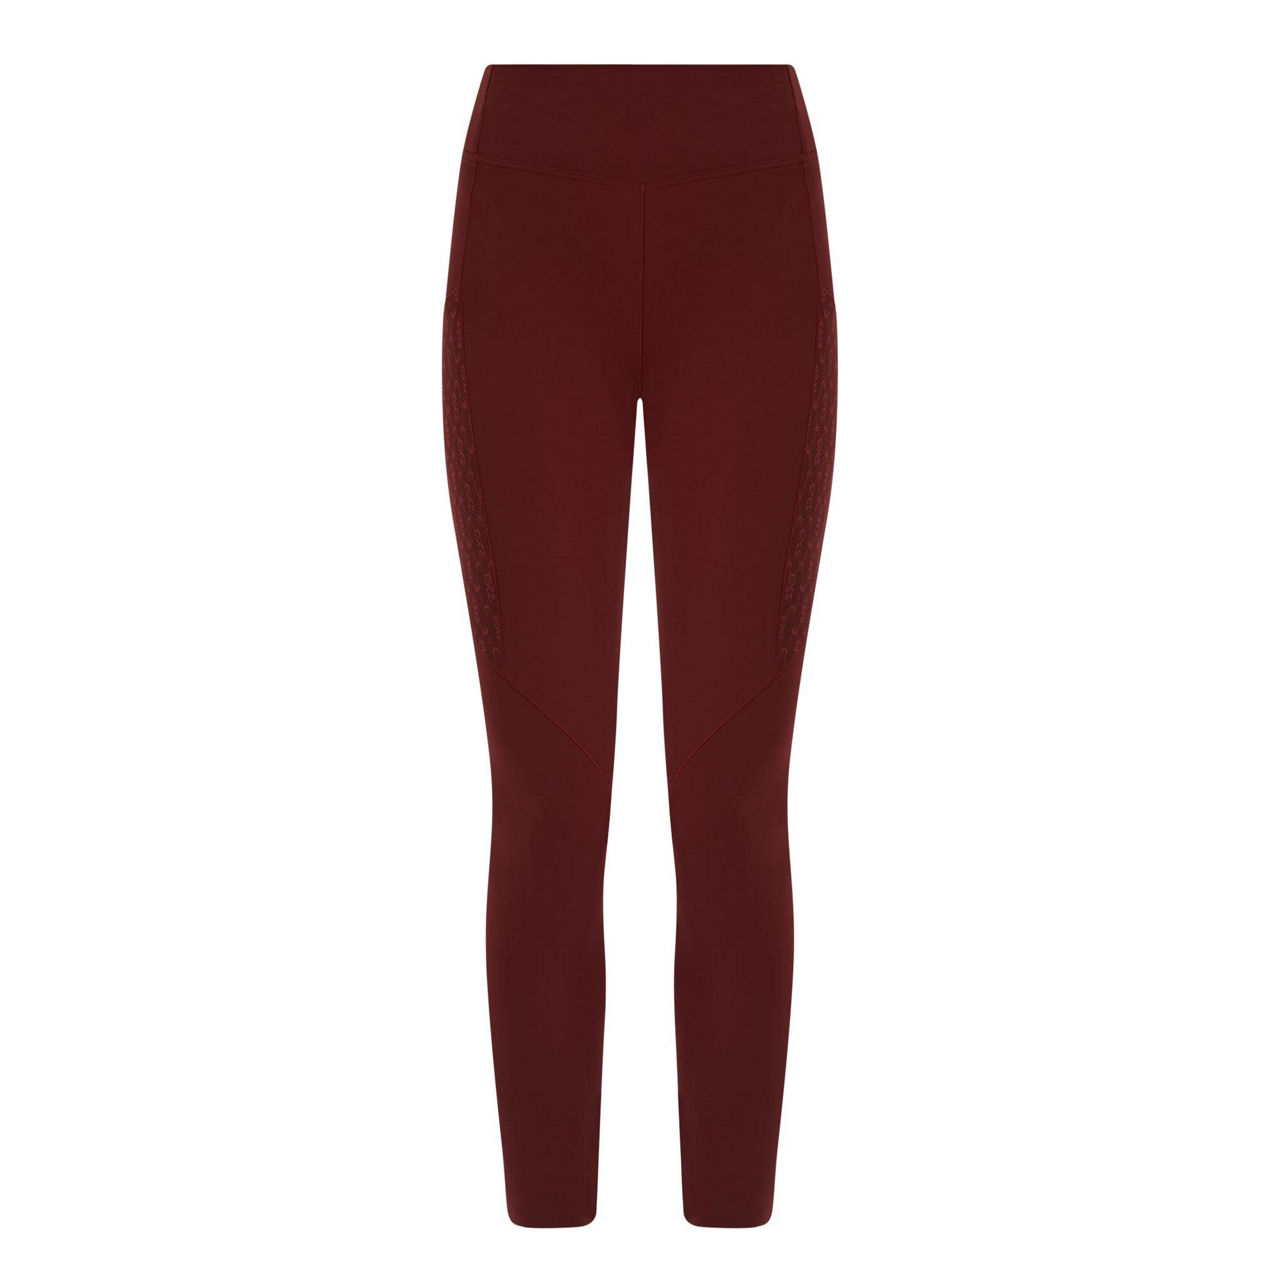 Remind lace-trimmed leggings in red - Eres